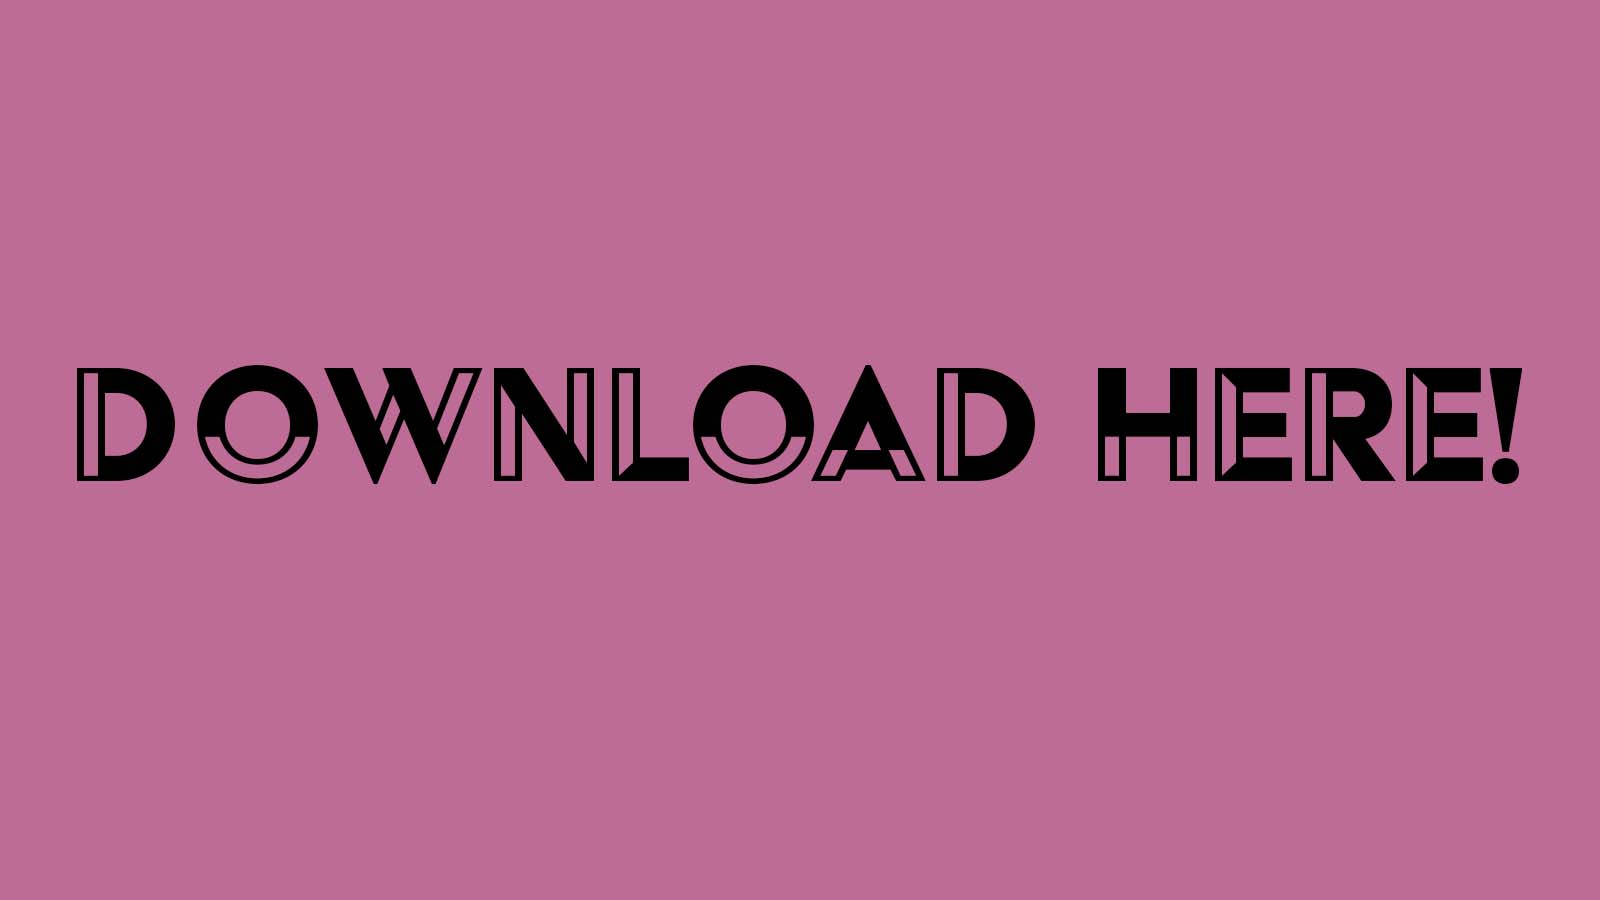 Download here button